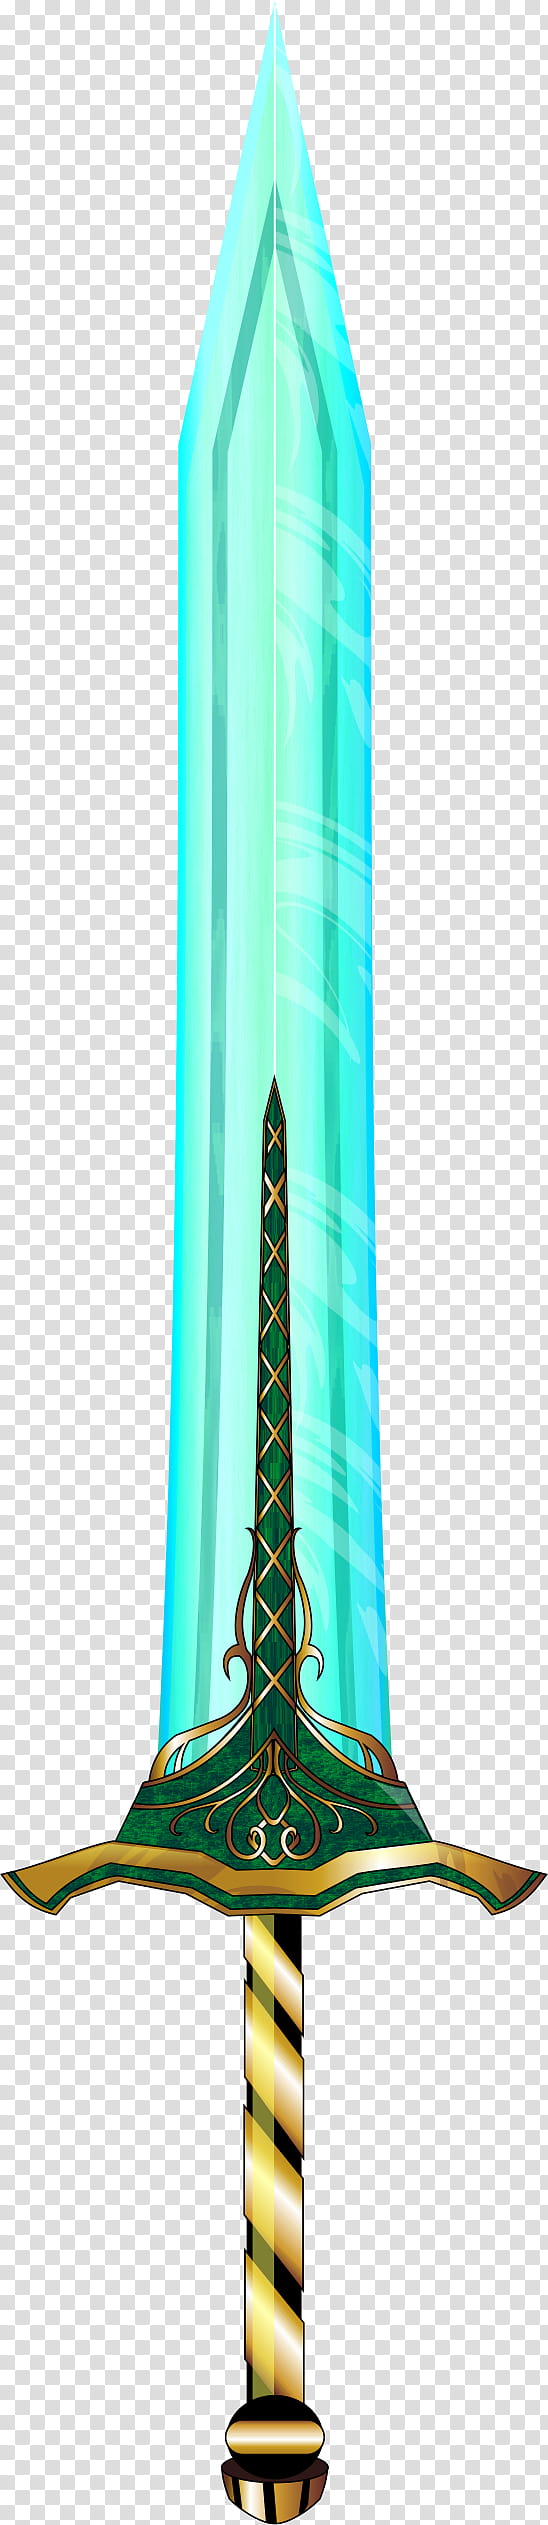 Classification Of Swords Turquoise, Dark Souls, Dark Souls II, Drawing, From Software, Wikidot, Teal, Tie transparent background PNG clipart